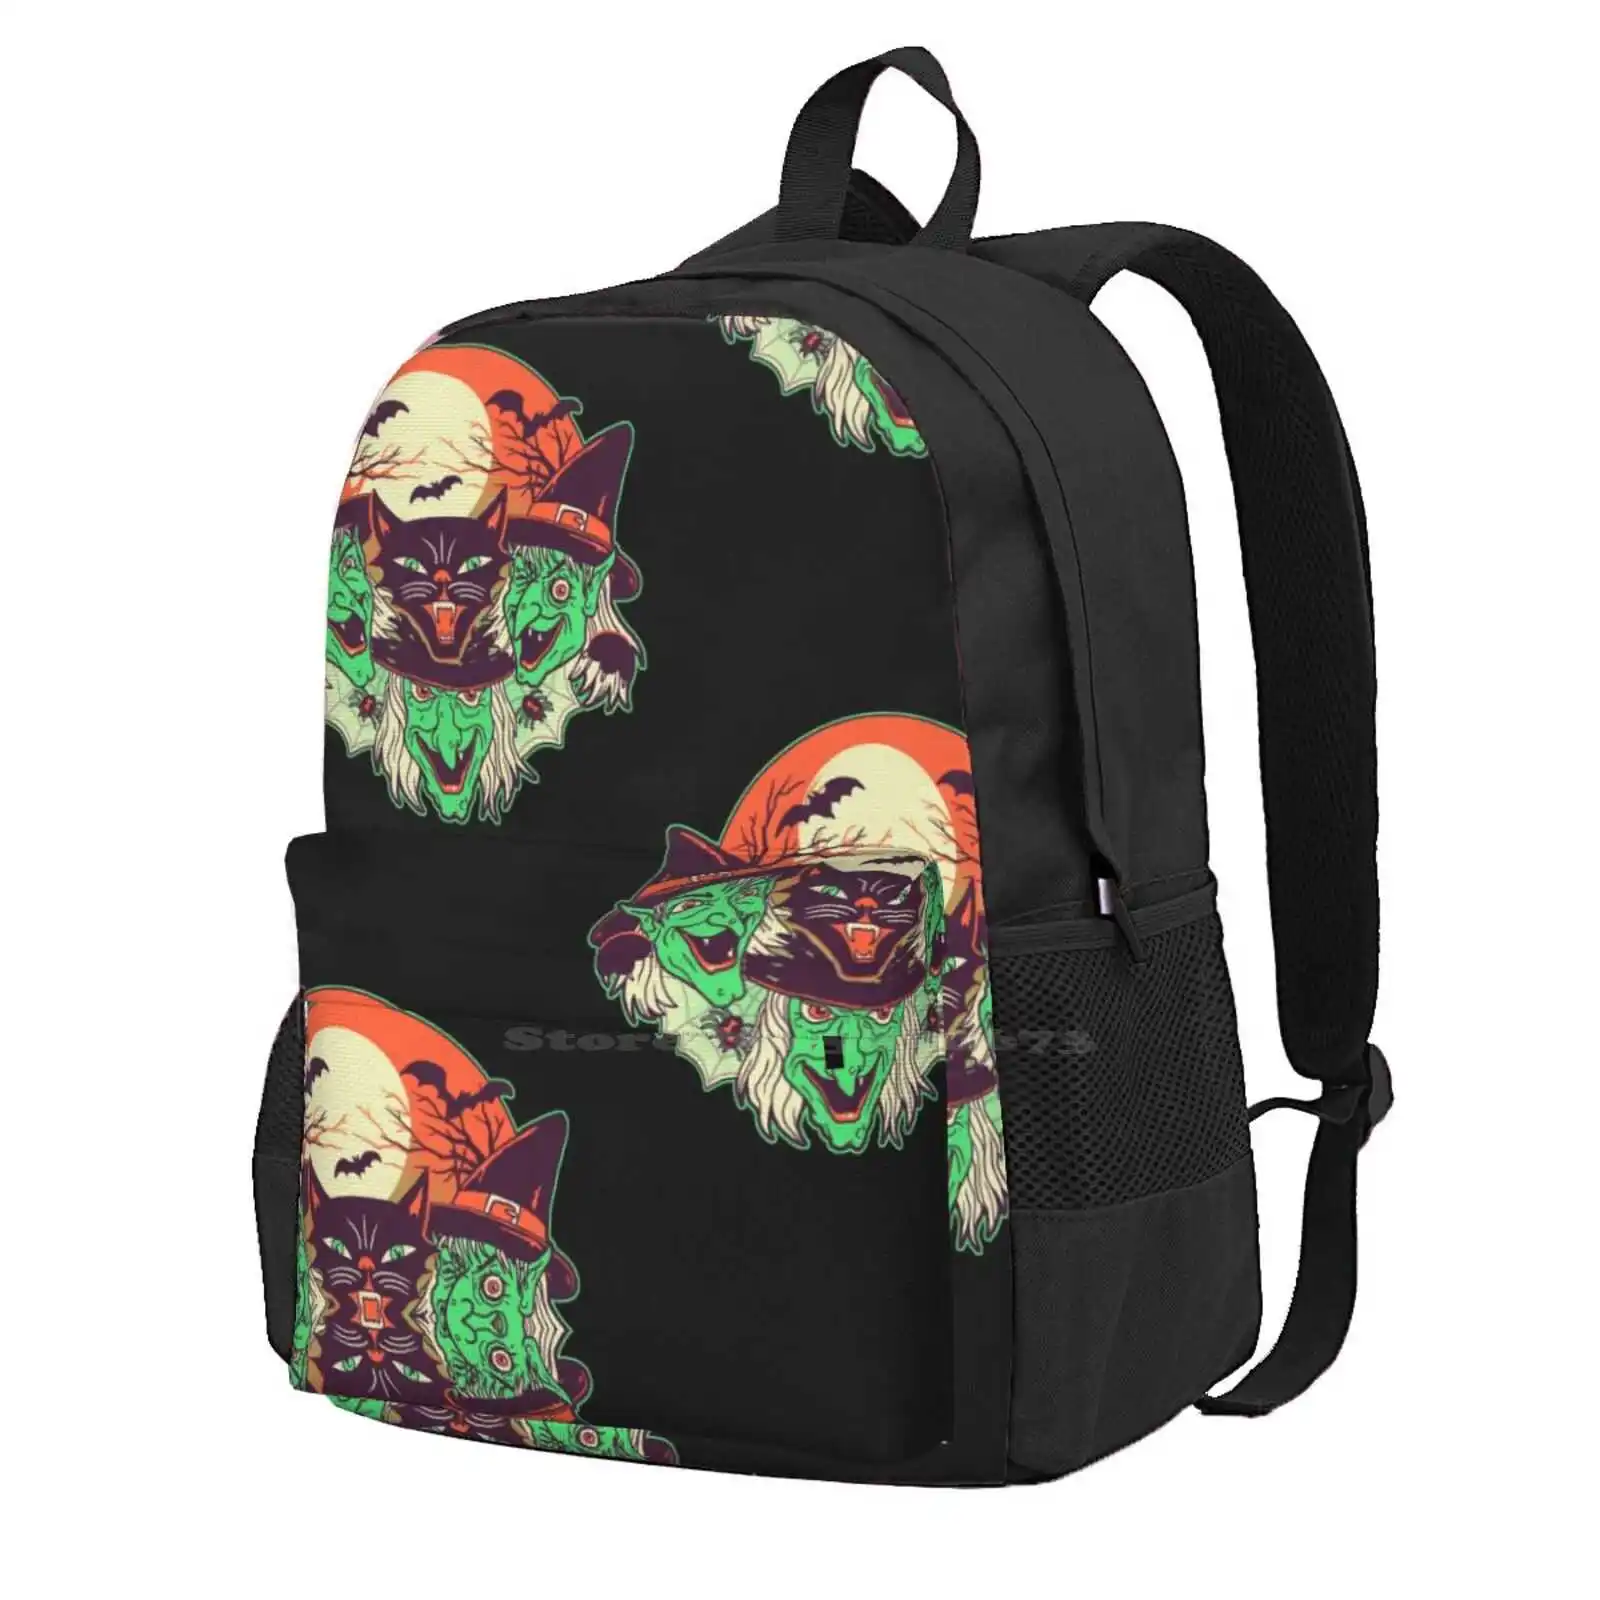 

My Witches Backpack For Student School Laptop Travel Bag Witch Black Cat Kitten Kitty Retro Vintage Spooky Horror Halloween